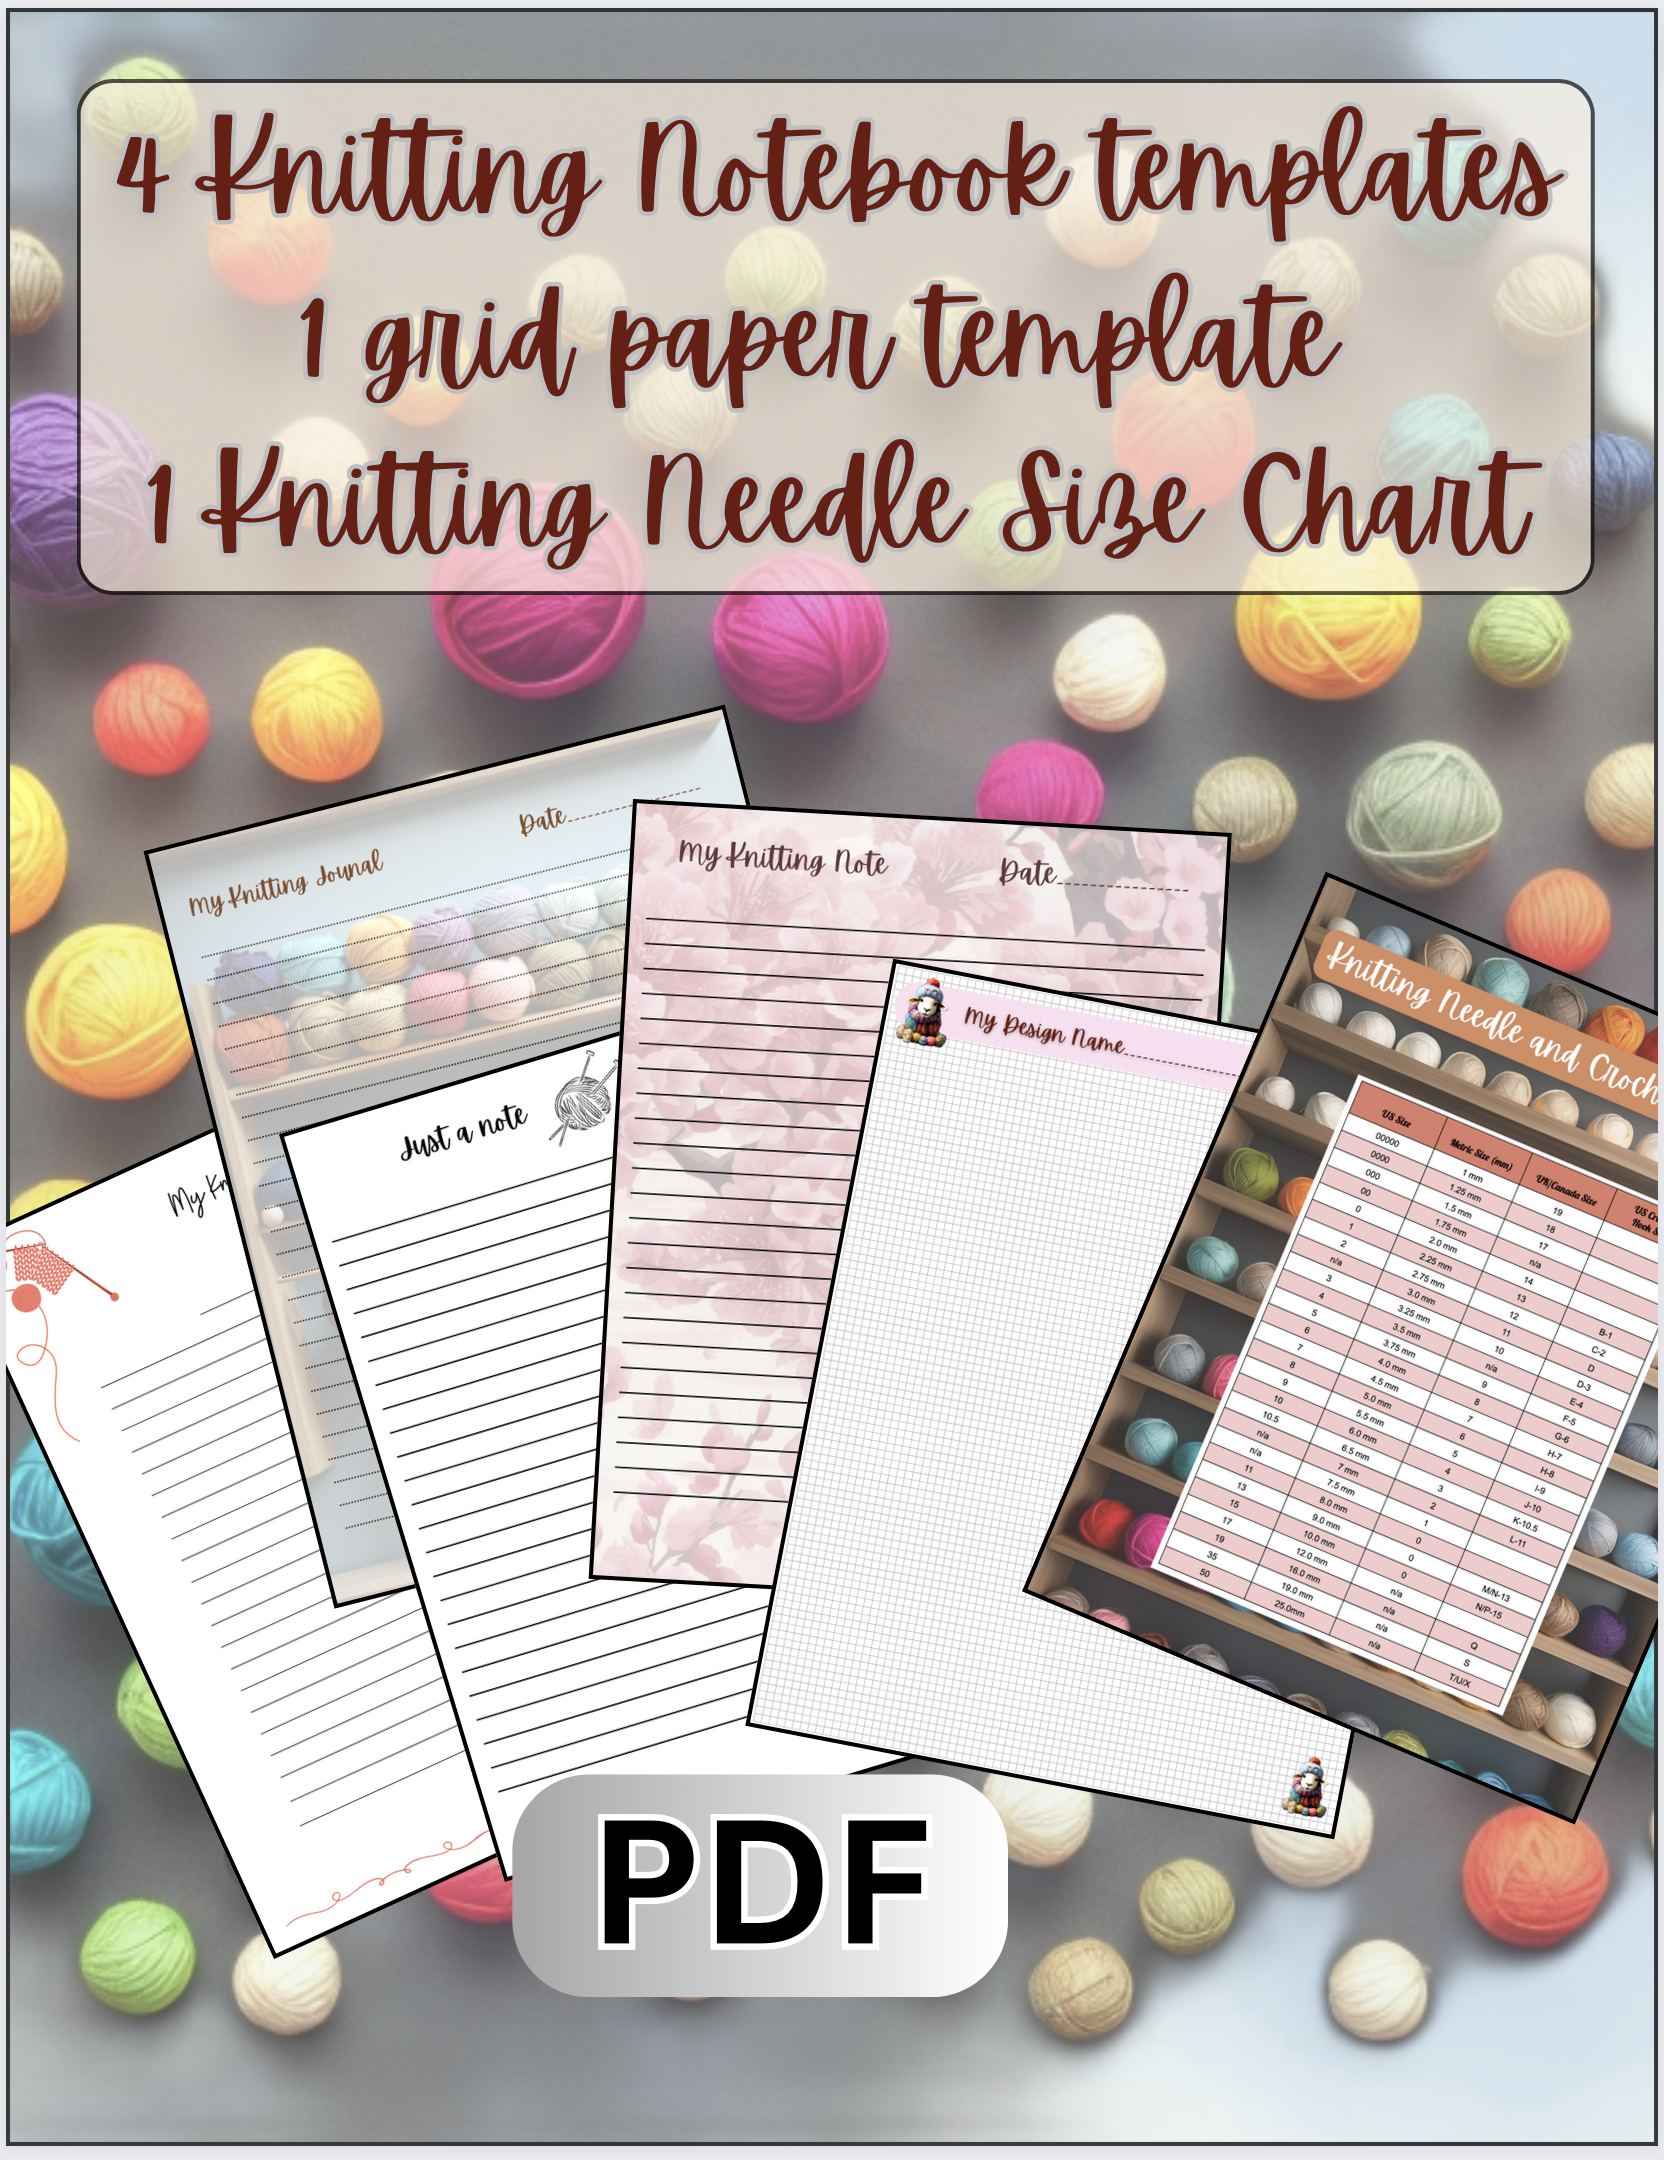 Journal and notebook templates designed specially for knitters.  You can download and print to use at home any time.